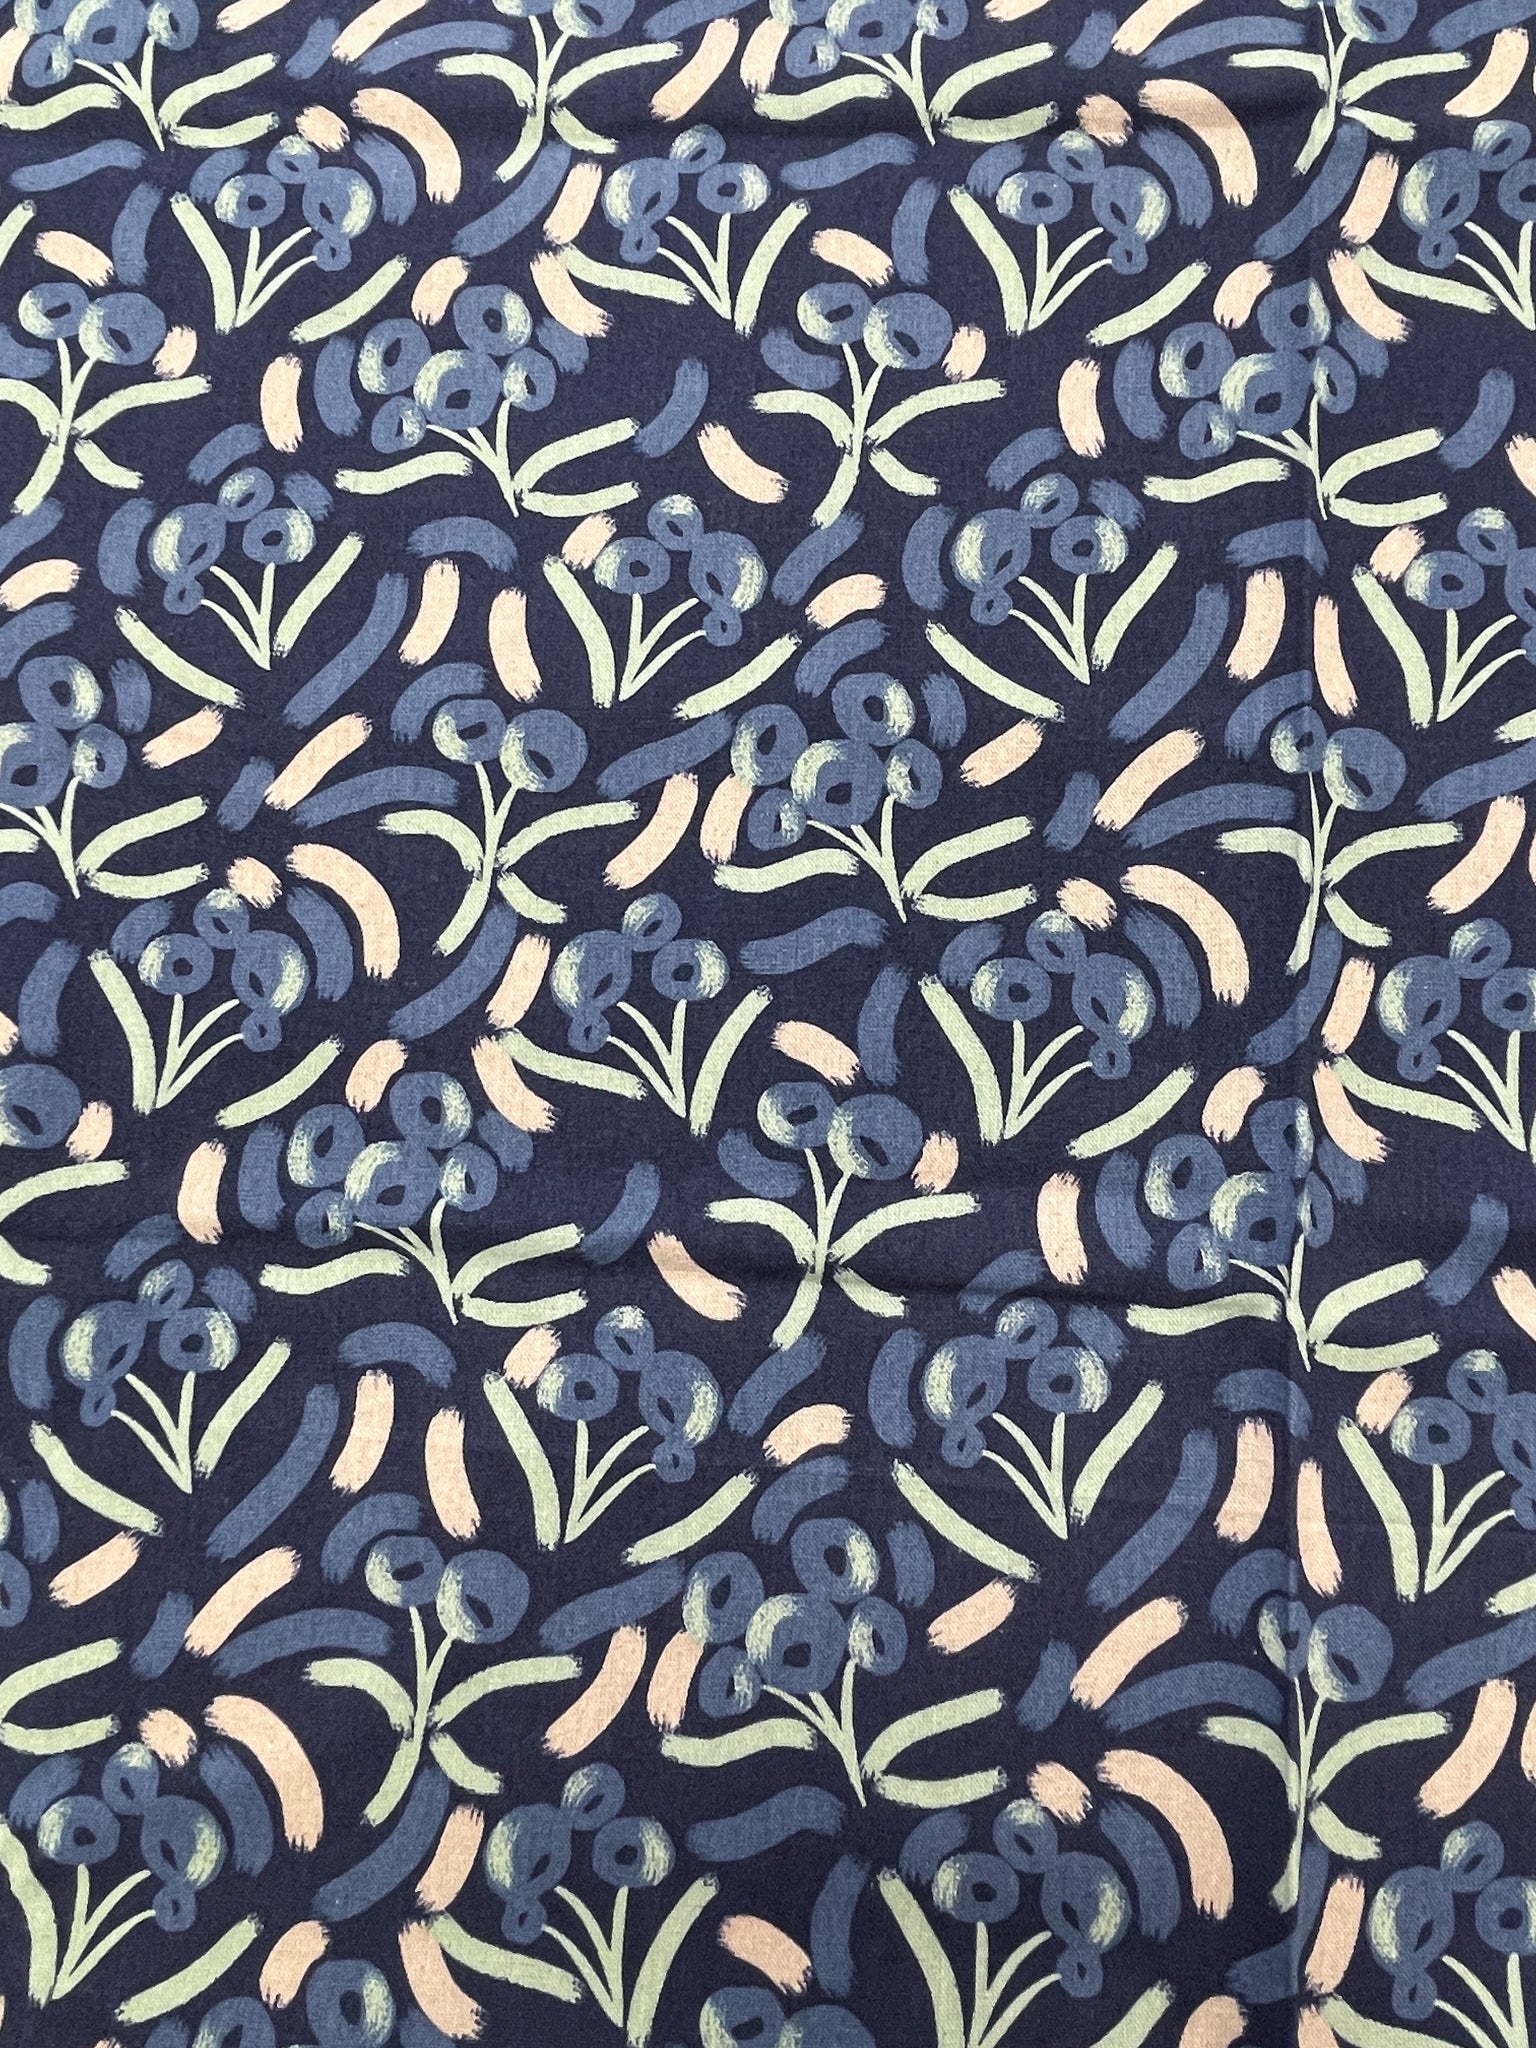 2 YD Cotton - Navy Blue with Blue Flowers, Pale Green and Pink "Brushstrokes"